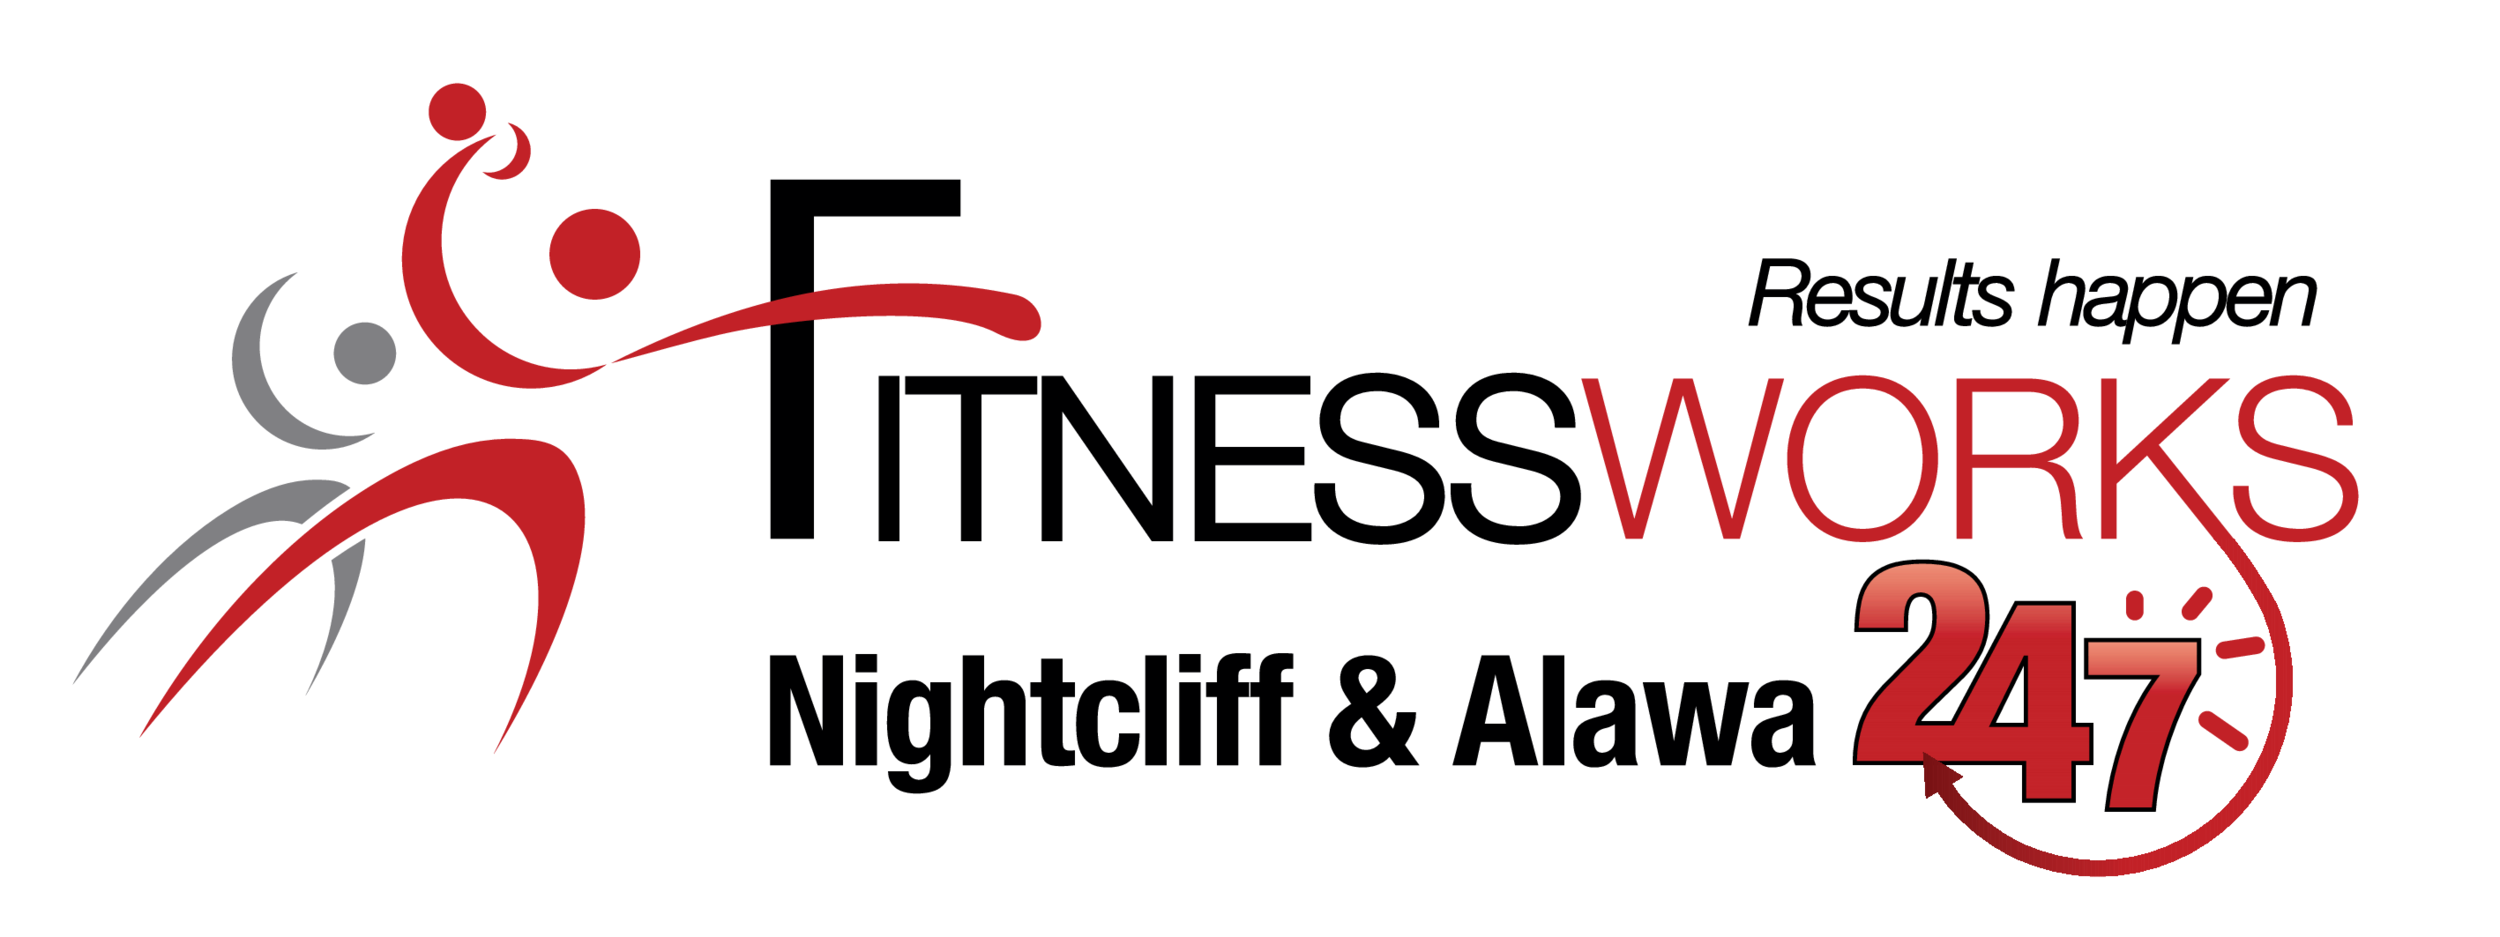 Fitness works logo.png